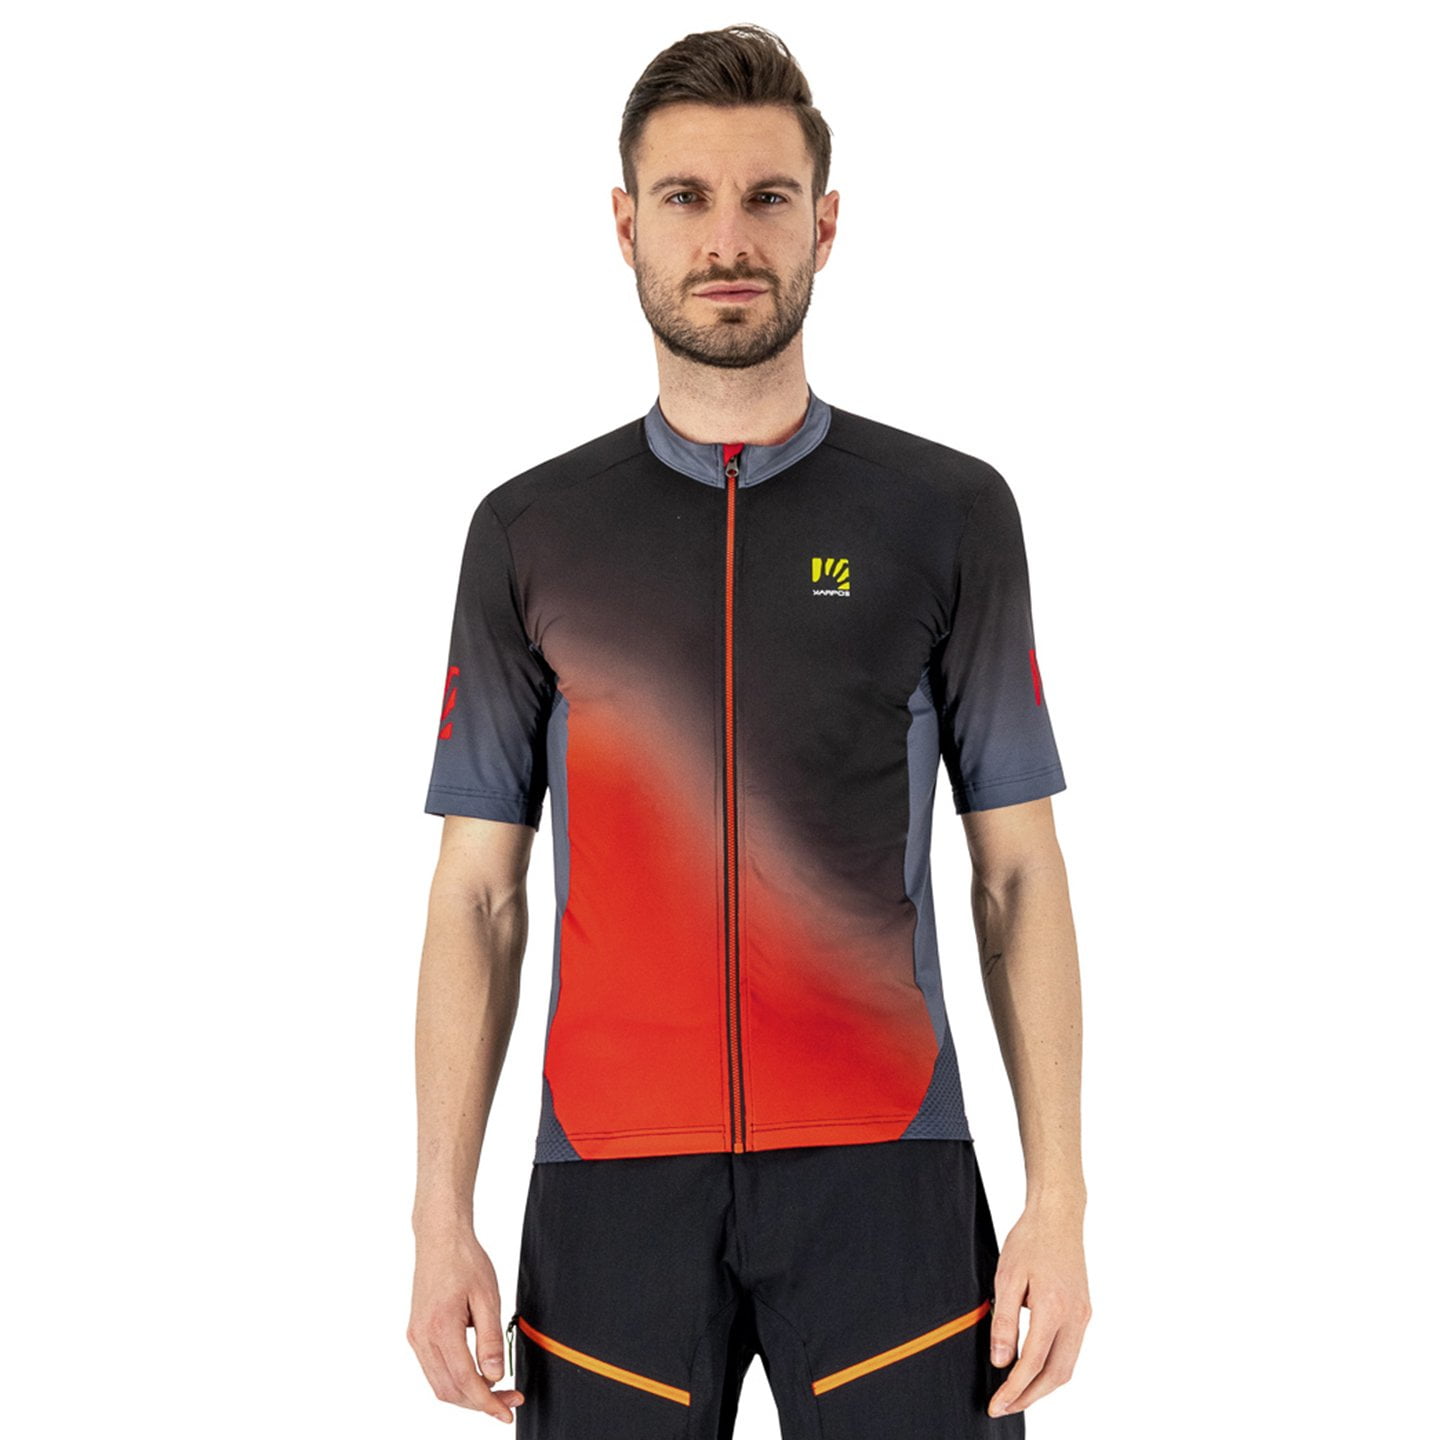 KARPOS Jump Short Sleeve Jersey, for men, size 2XL, Cycling jersey, Cycle clothing